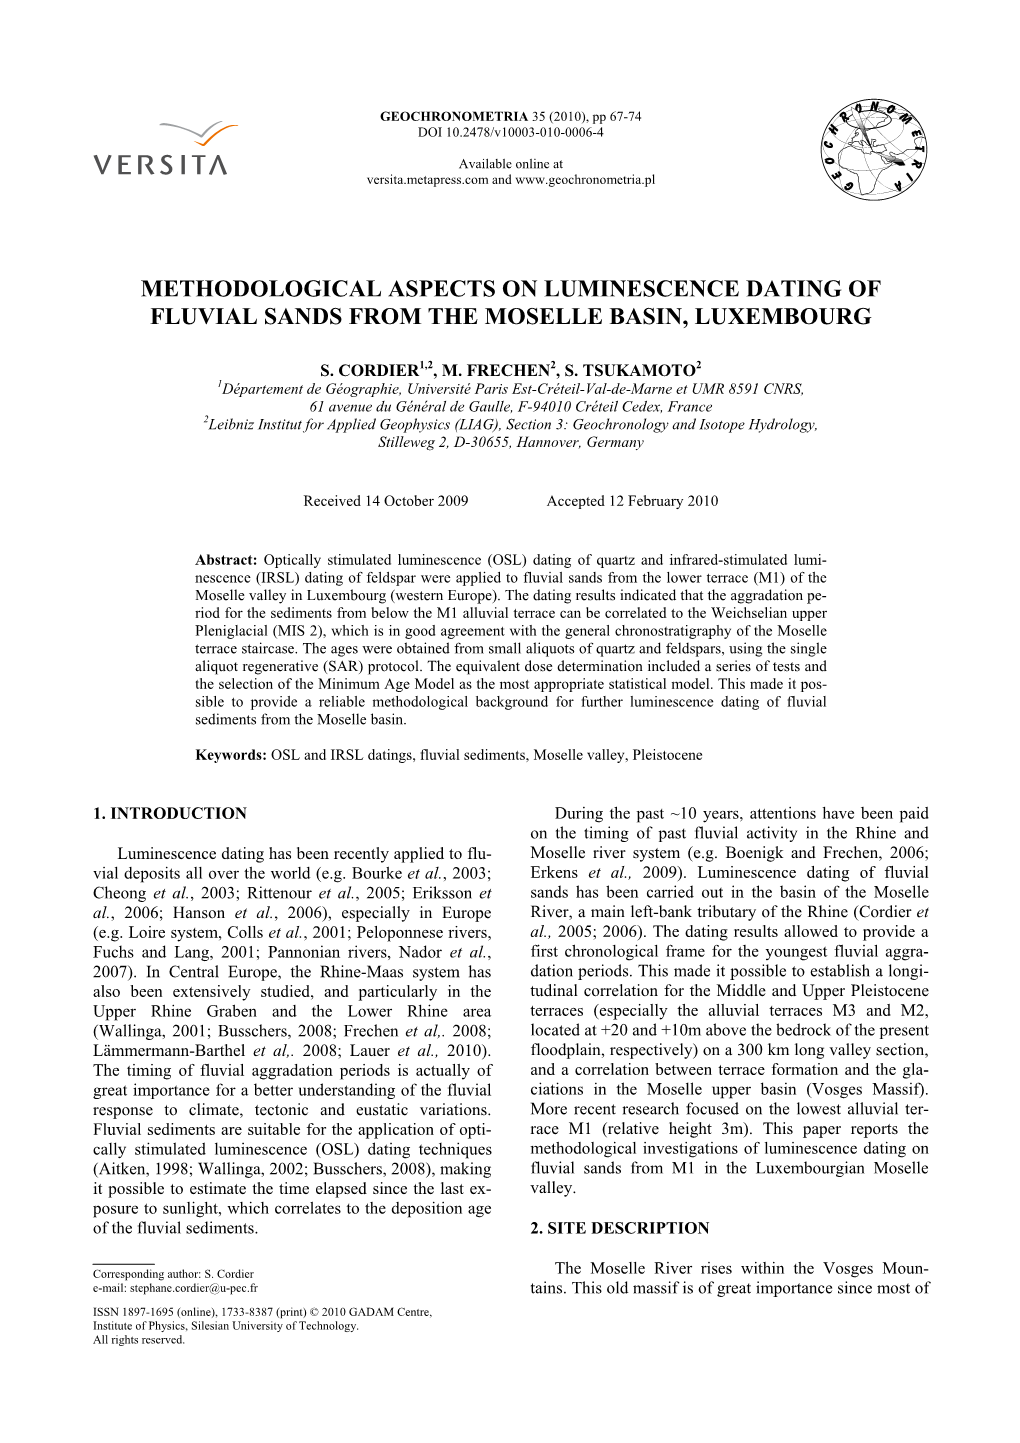 Methodological Aspects on Luminescence Dating of Fluvial Sands from the Moselle Basin, Luxembourg